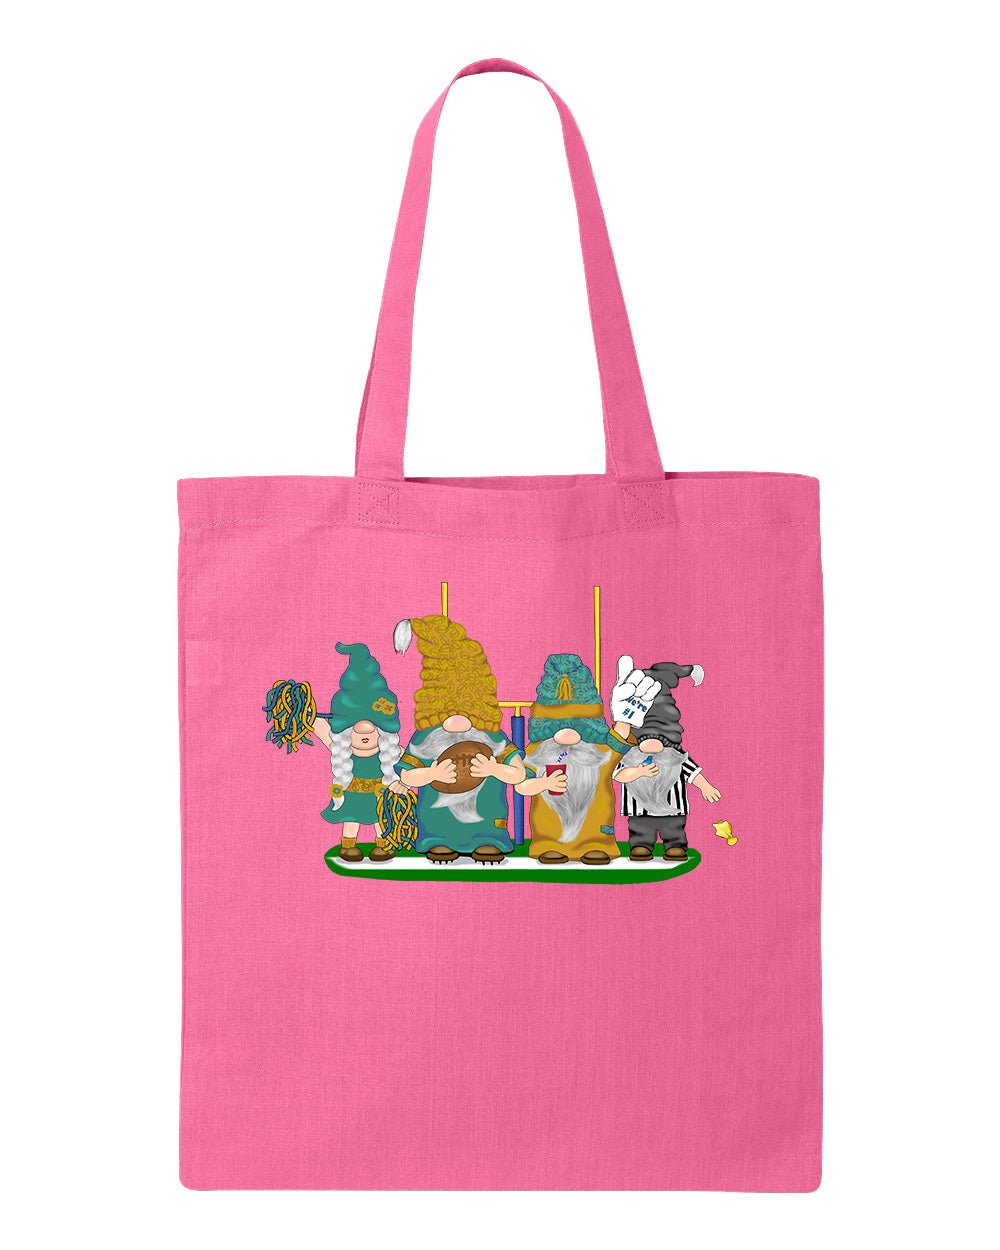 Teal & Gold Football Gnomes  (similar to Jacksonville) on Tote